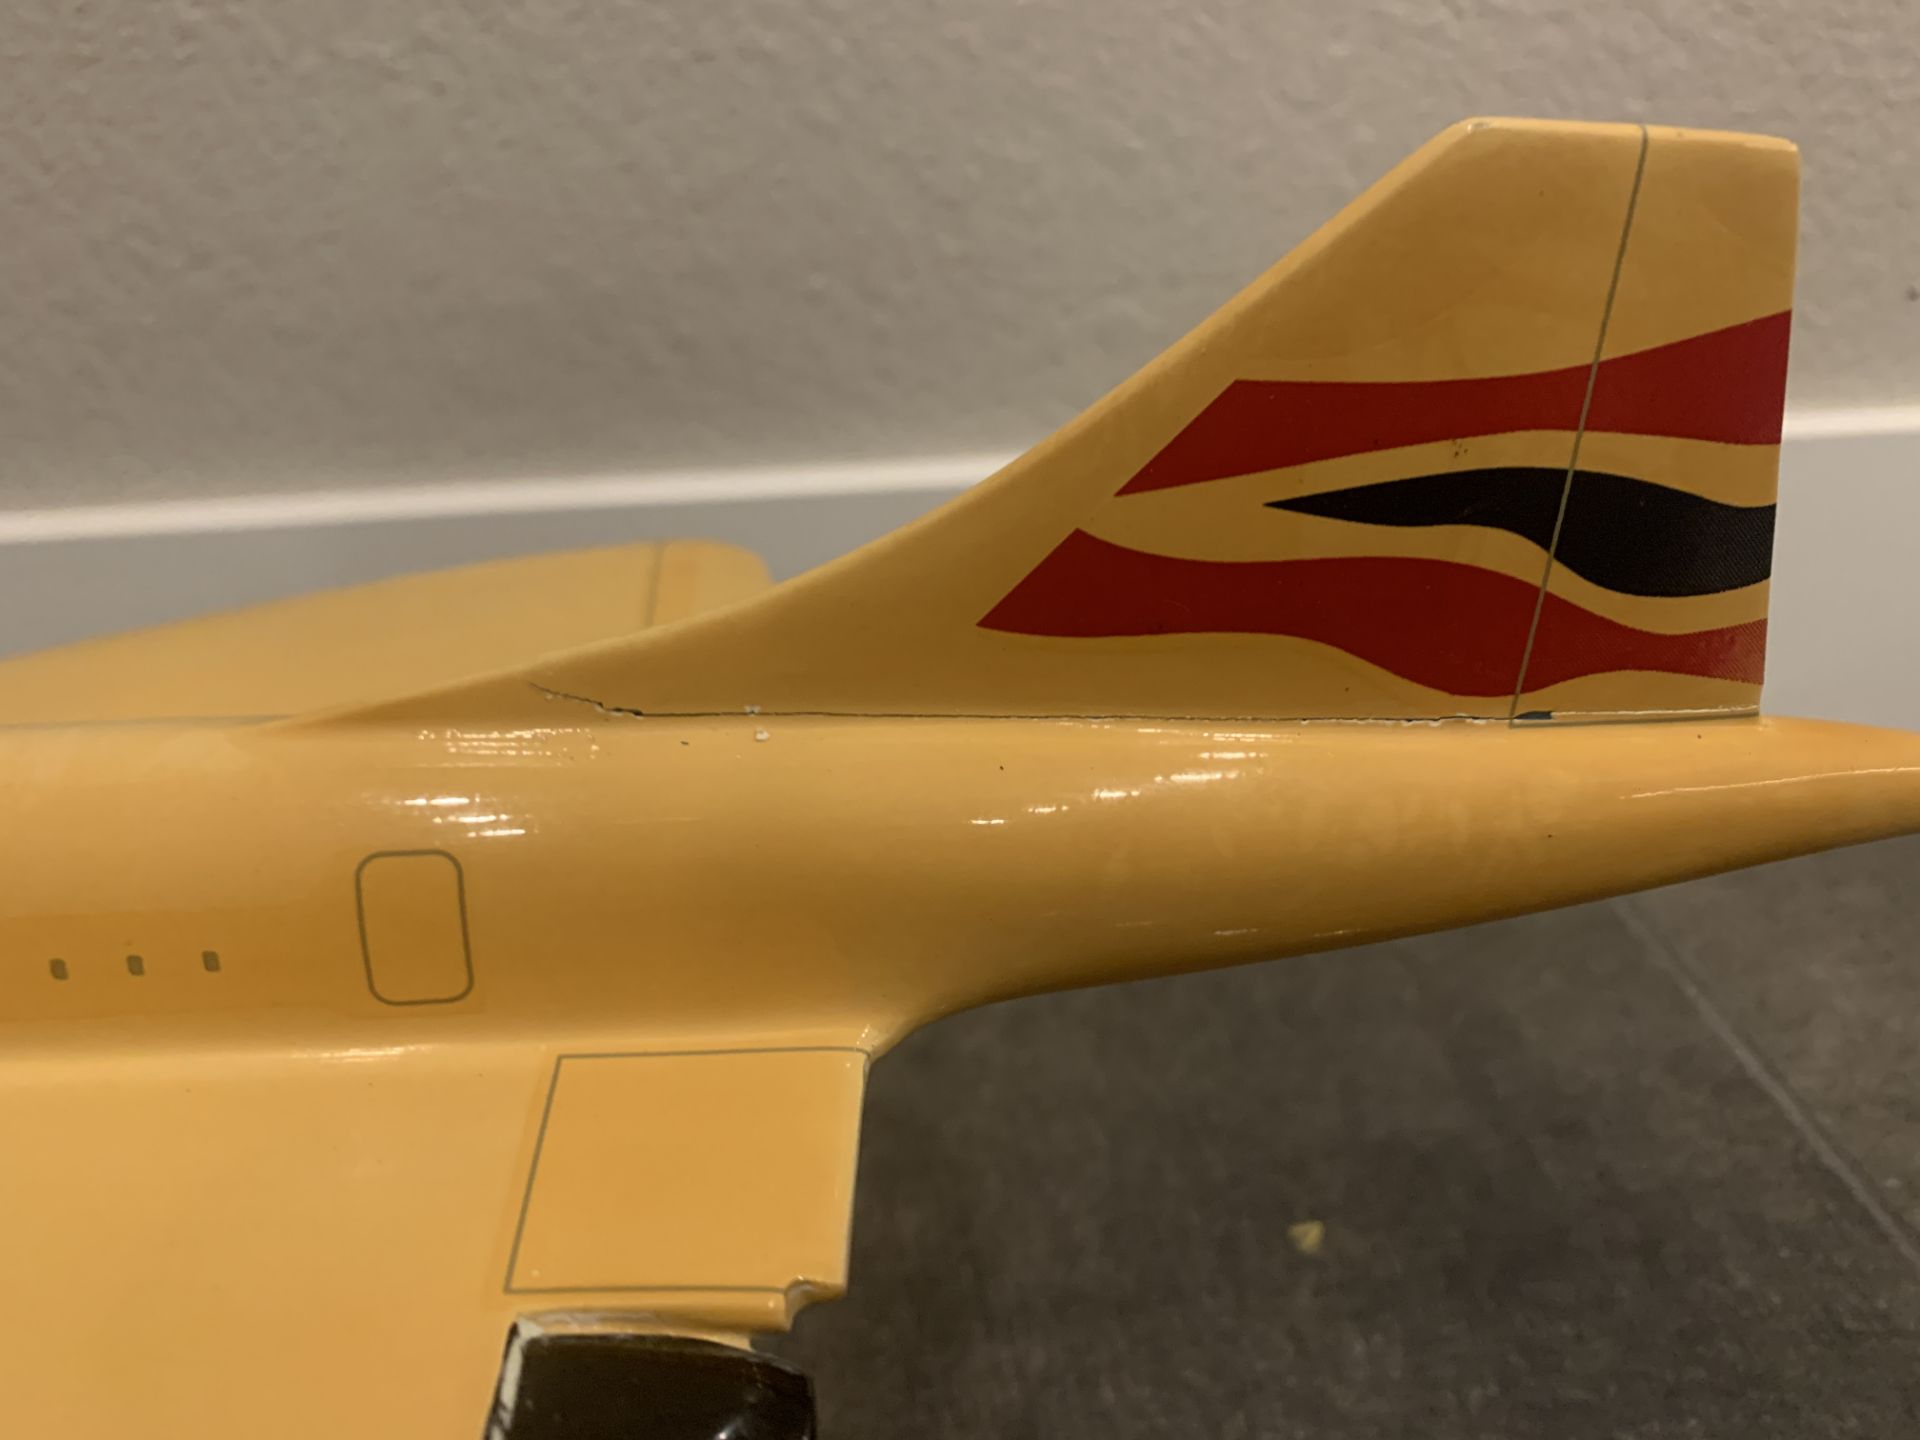 British Airways Concorde + Space Shuttle Jet Model On Stand Rare Vintage - Image 6 of 7